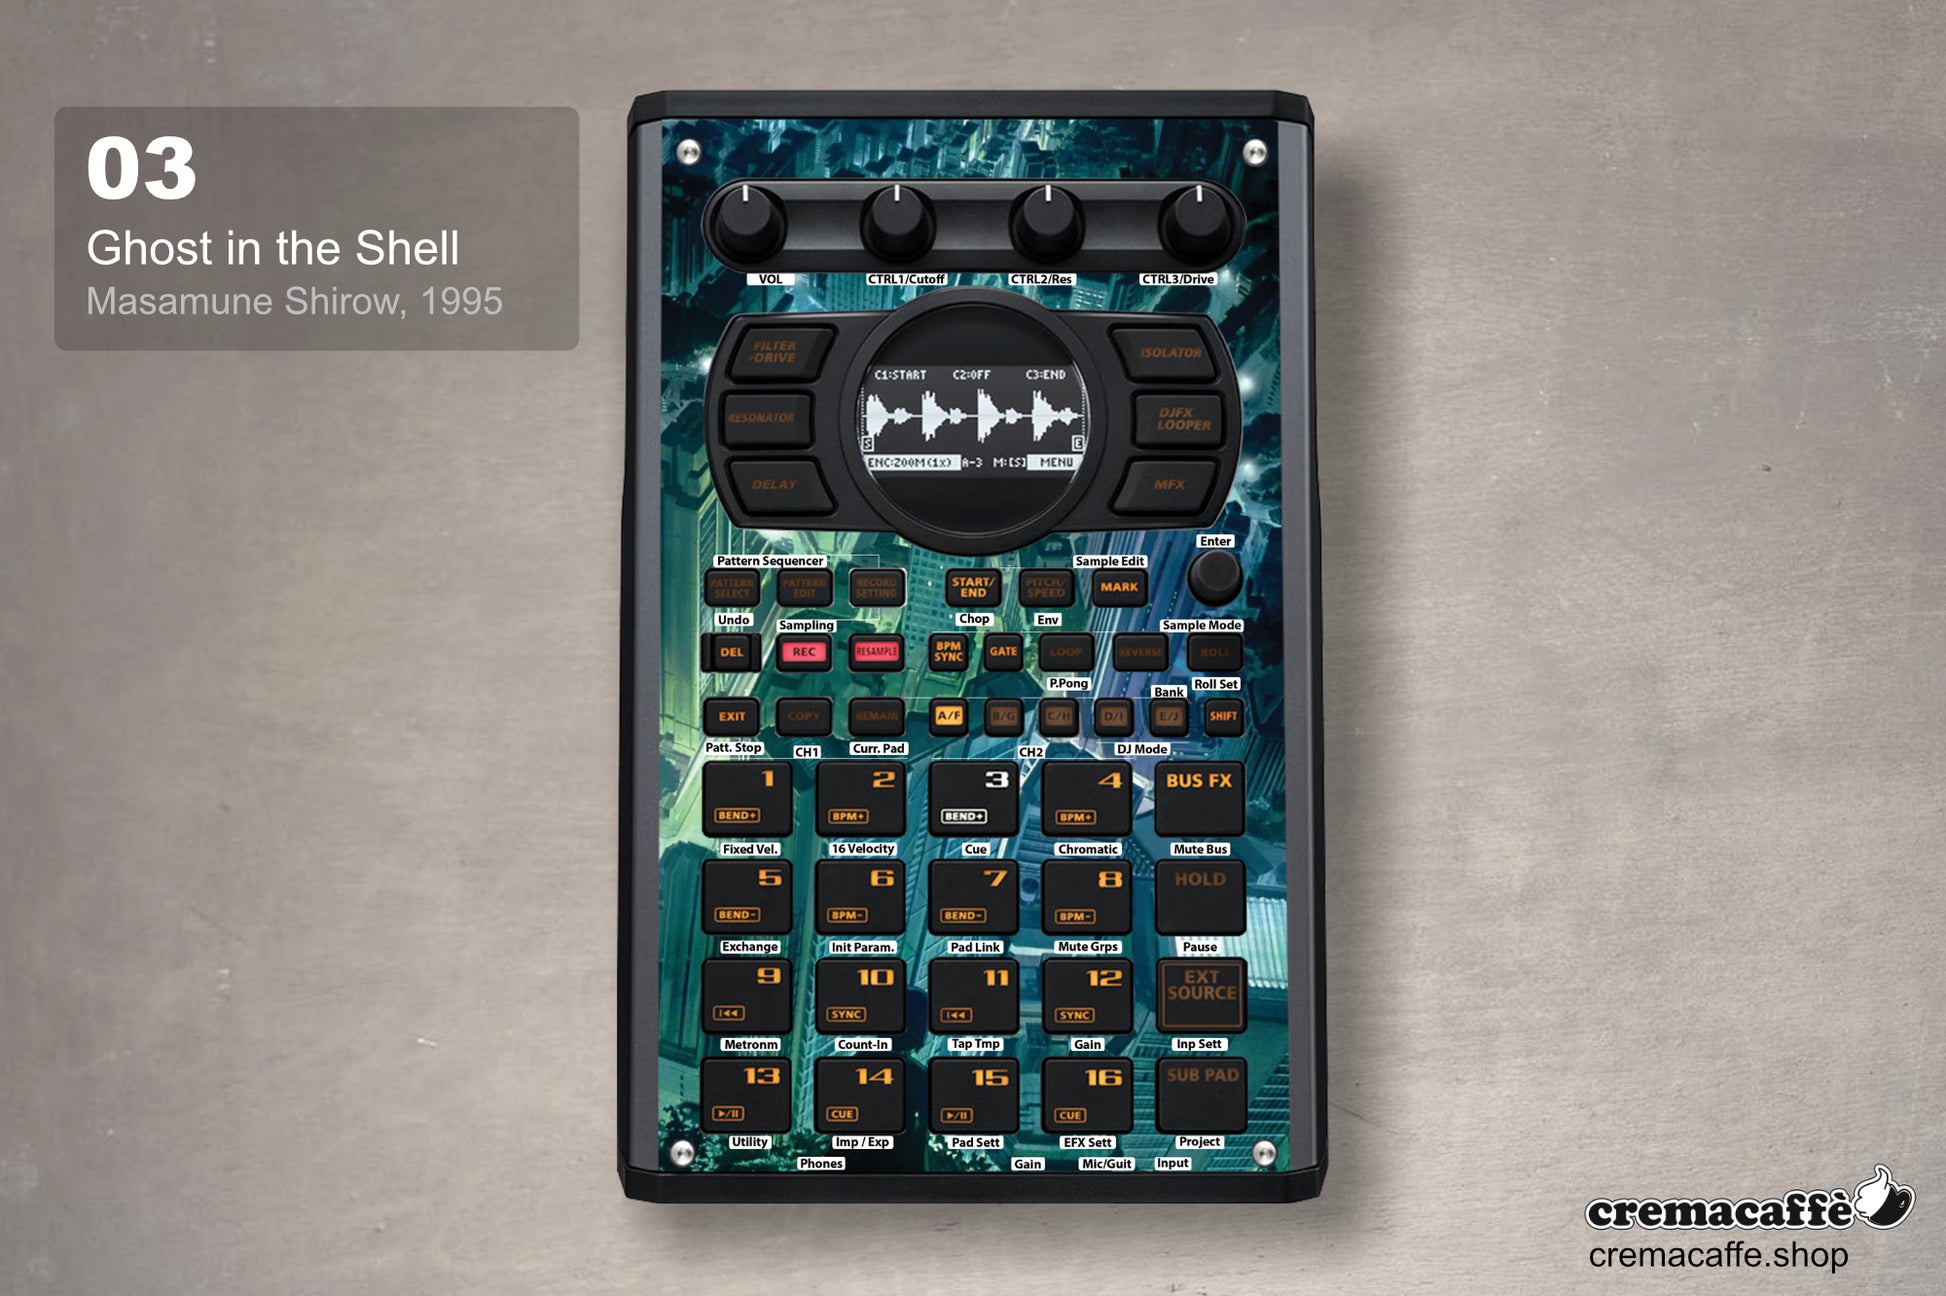 SP-404 MK2 non-adhesive skin "Ghost in the Shell" - Cremacaffe Design